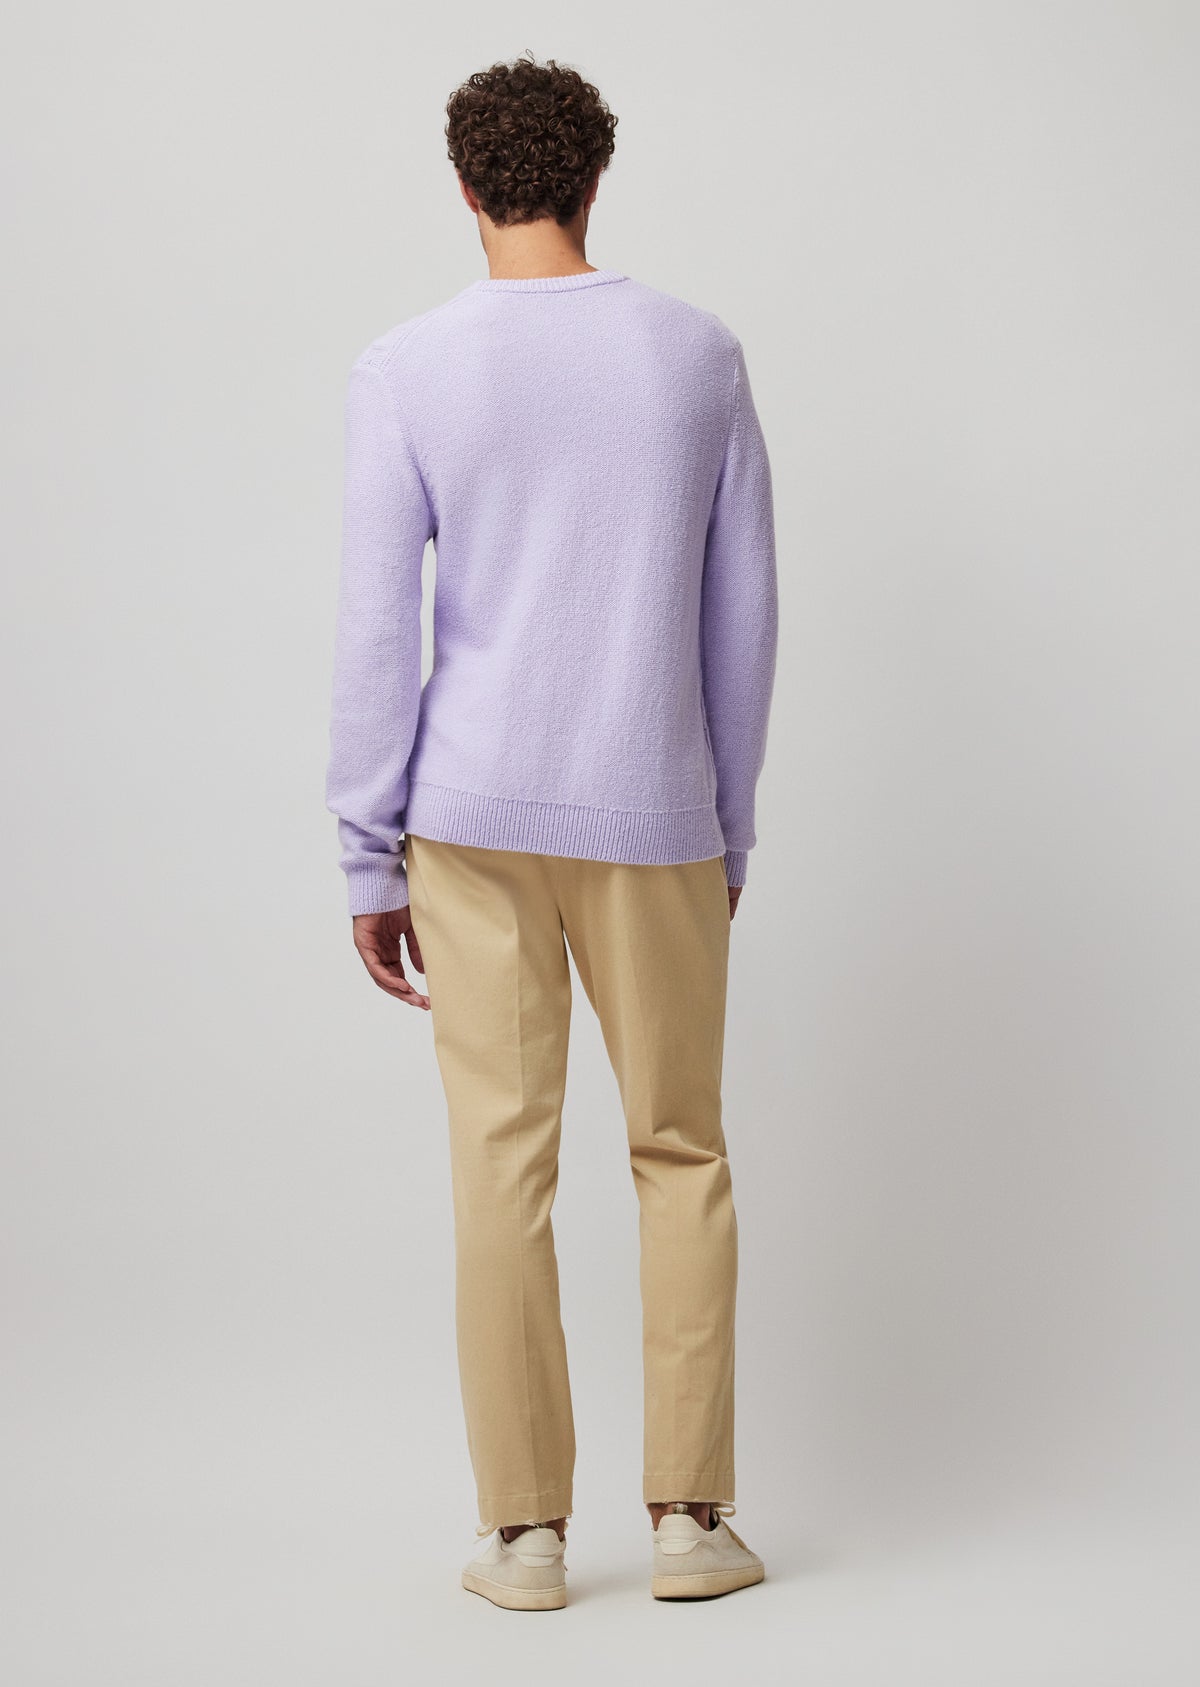 Recycled Cashmere Exposed Seam Crew Neck Sweater - Caramel